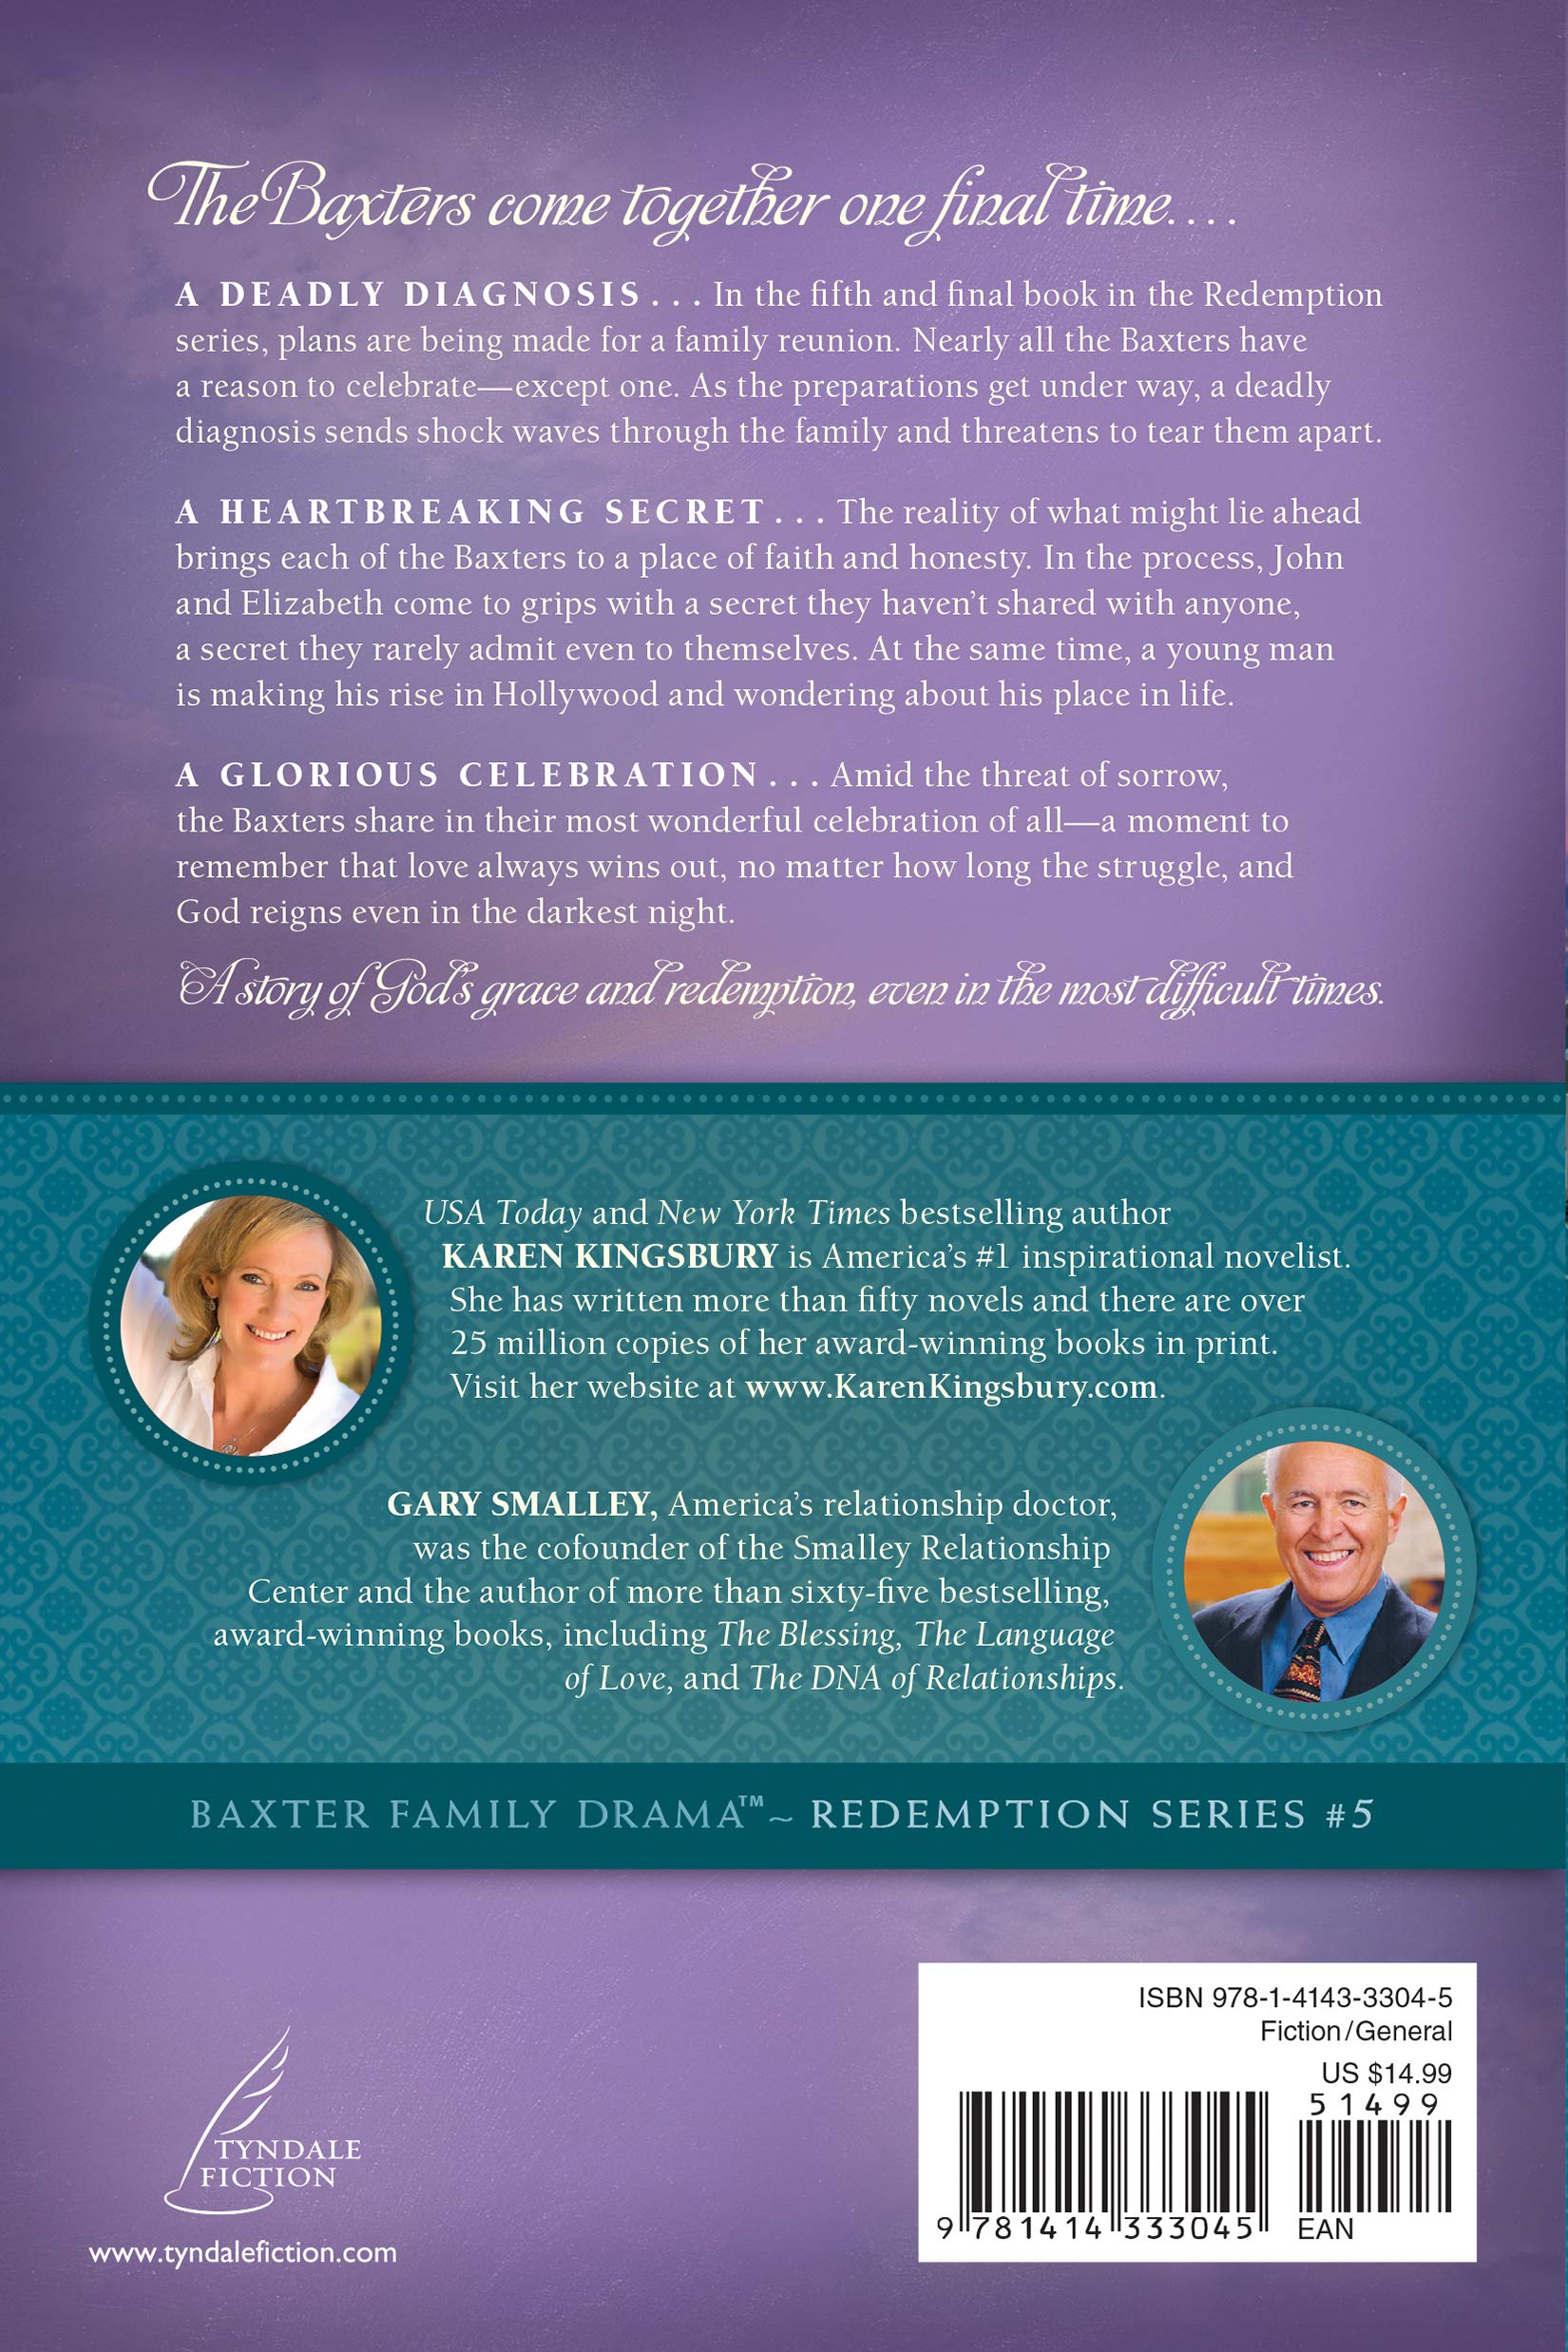 Reunion: The Baxter Family, Redemption Series (Book 5) Clean, Contemporary Christian Fiction (Baxter Family Drama--Redemption Series)